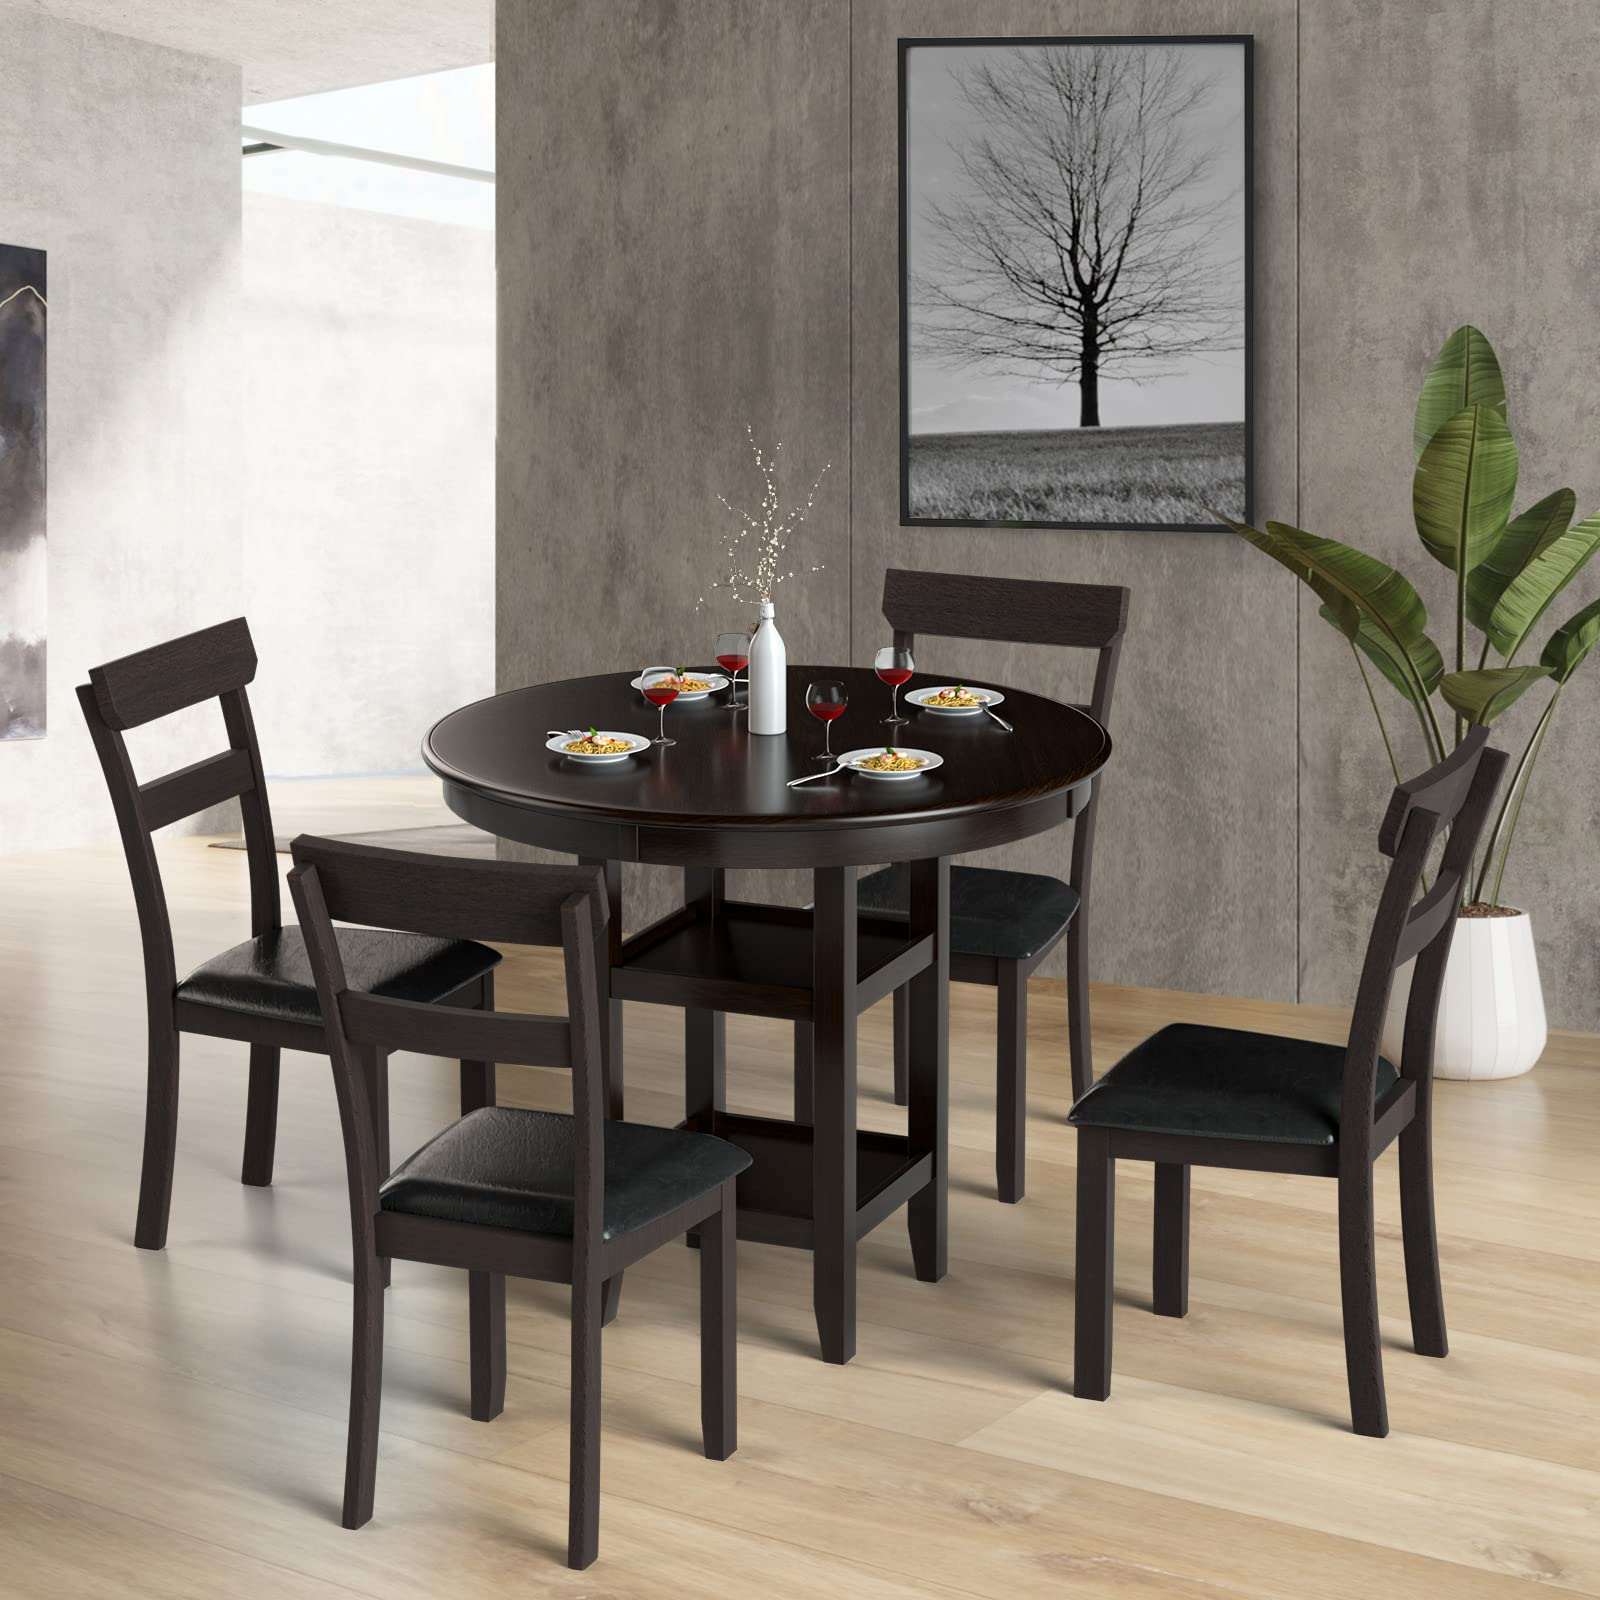 Giantex Black Dining Chairs, Upholstered Leather Kitchen Dining Room Chairs